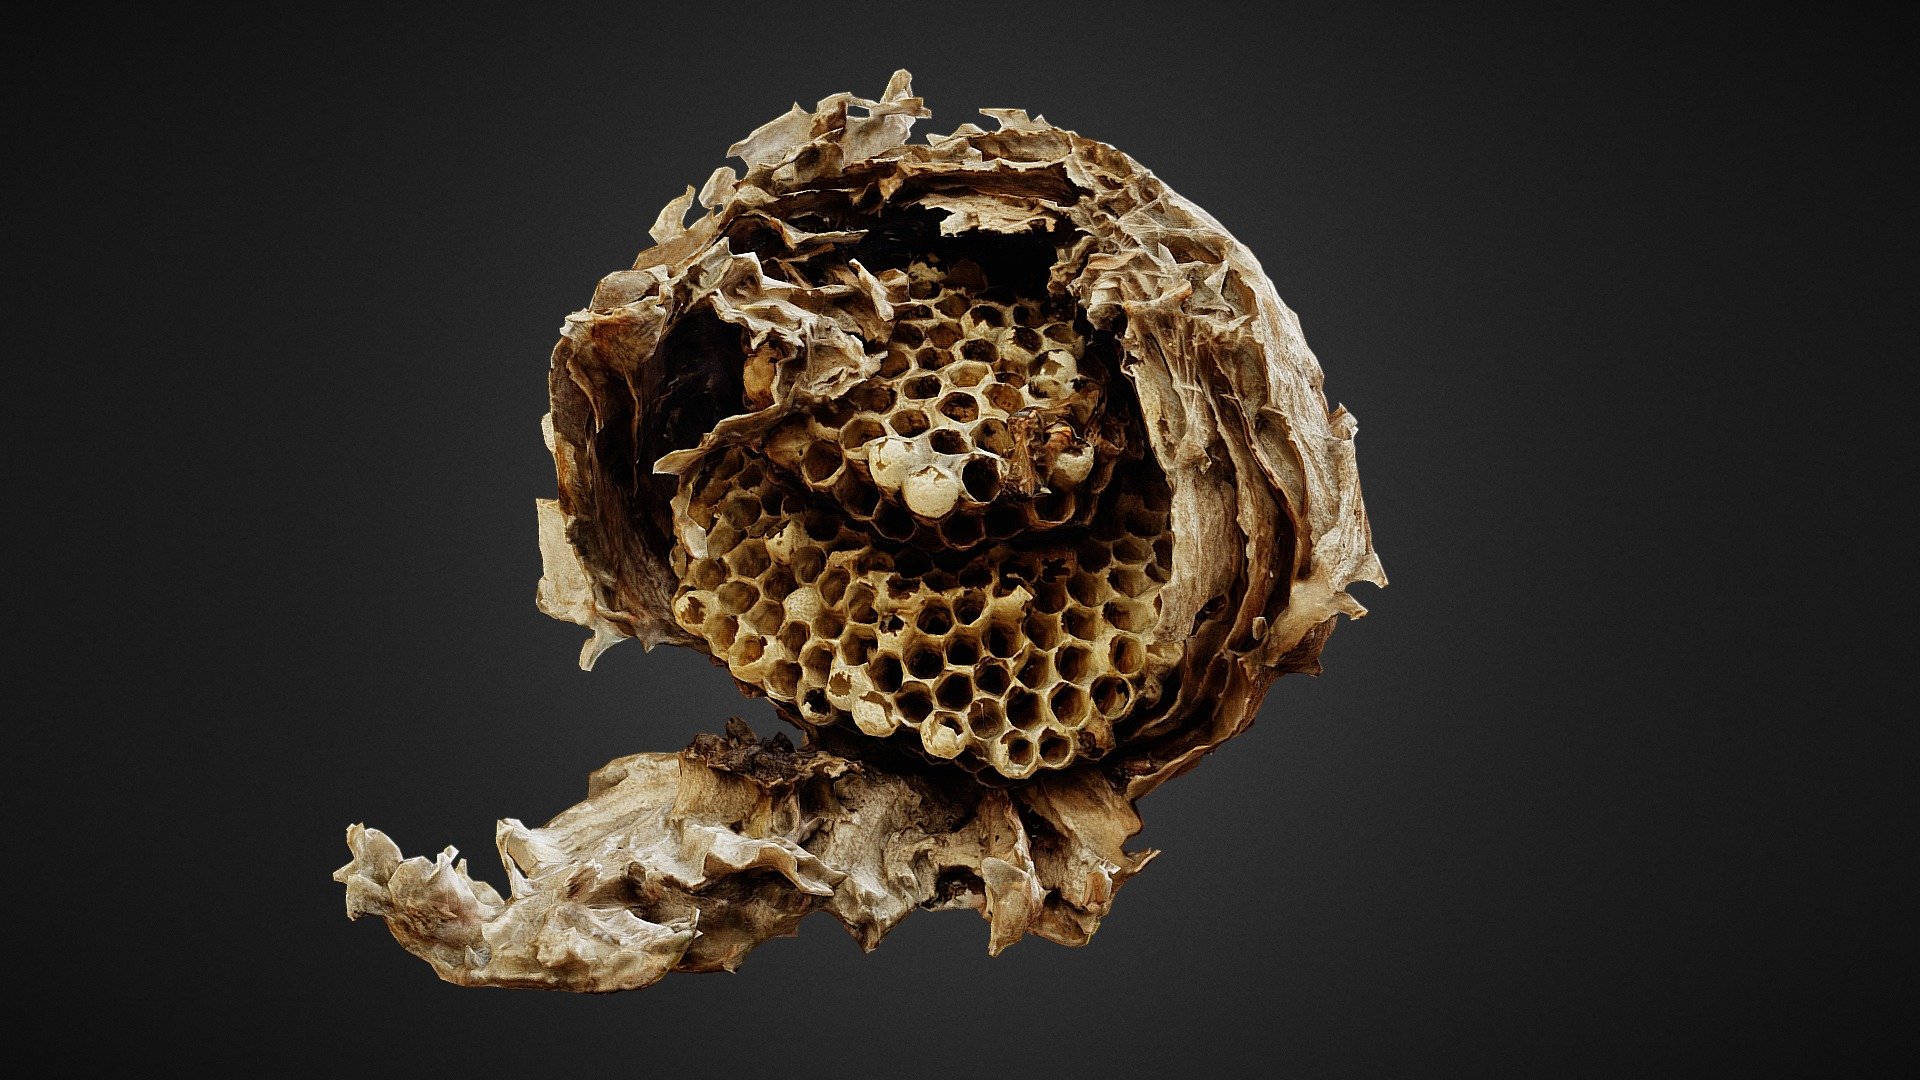 Photogrammetry of a wasps' nest. Ready to use 3d model